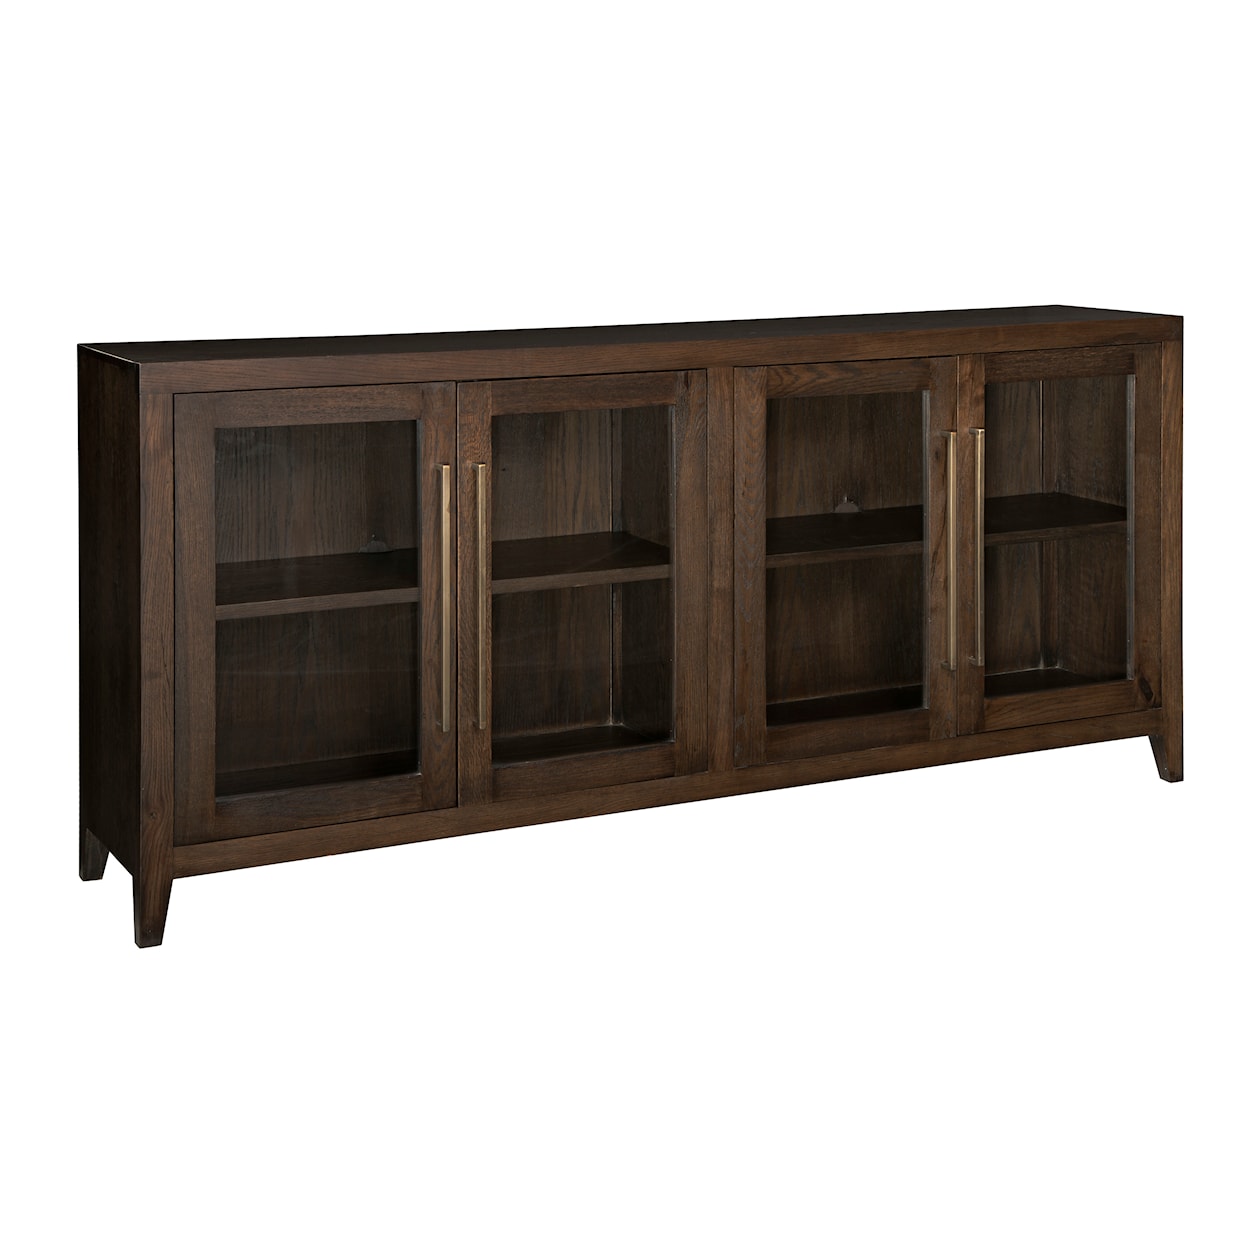 Benchcraft Balintmore Accent Cabinet